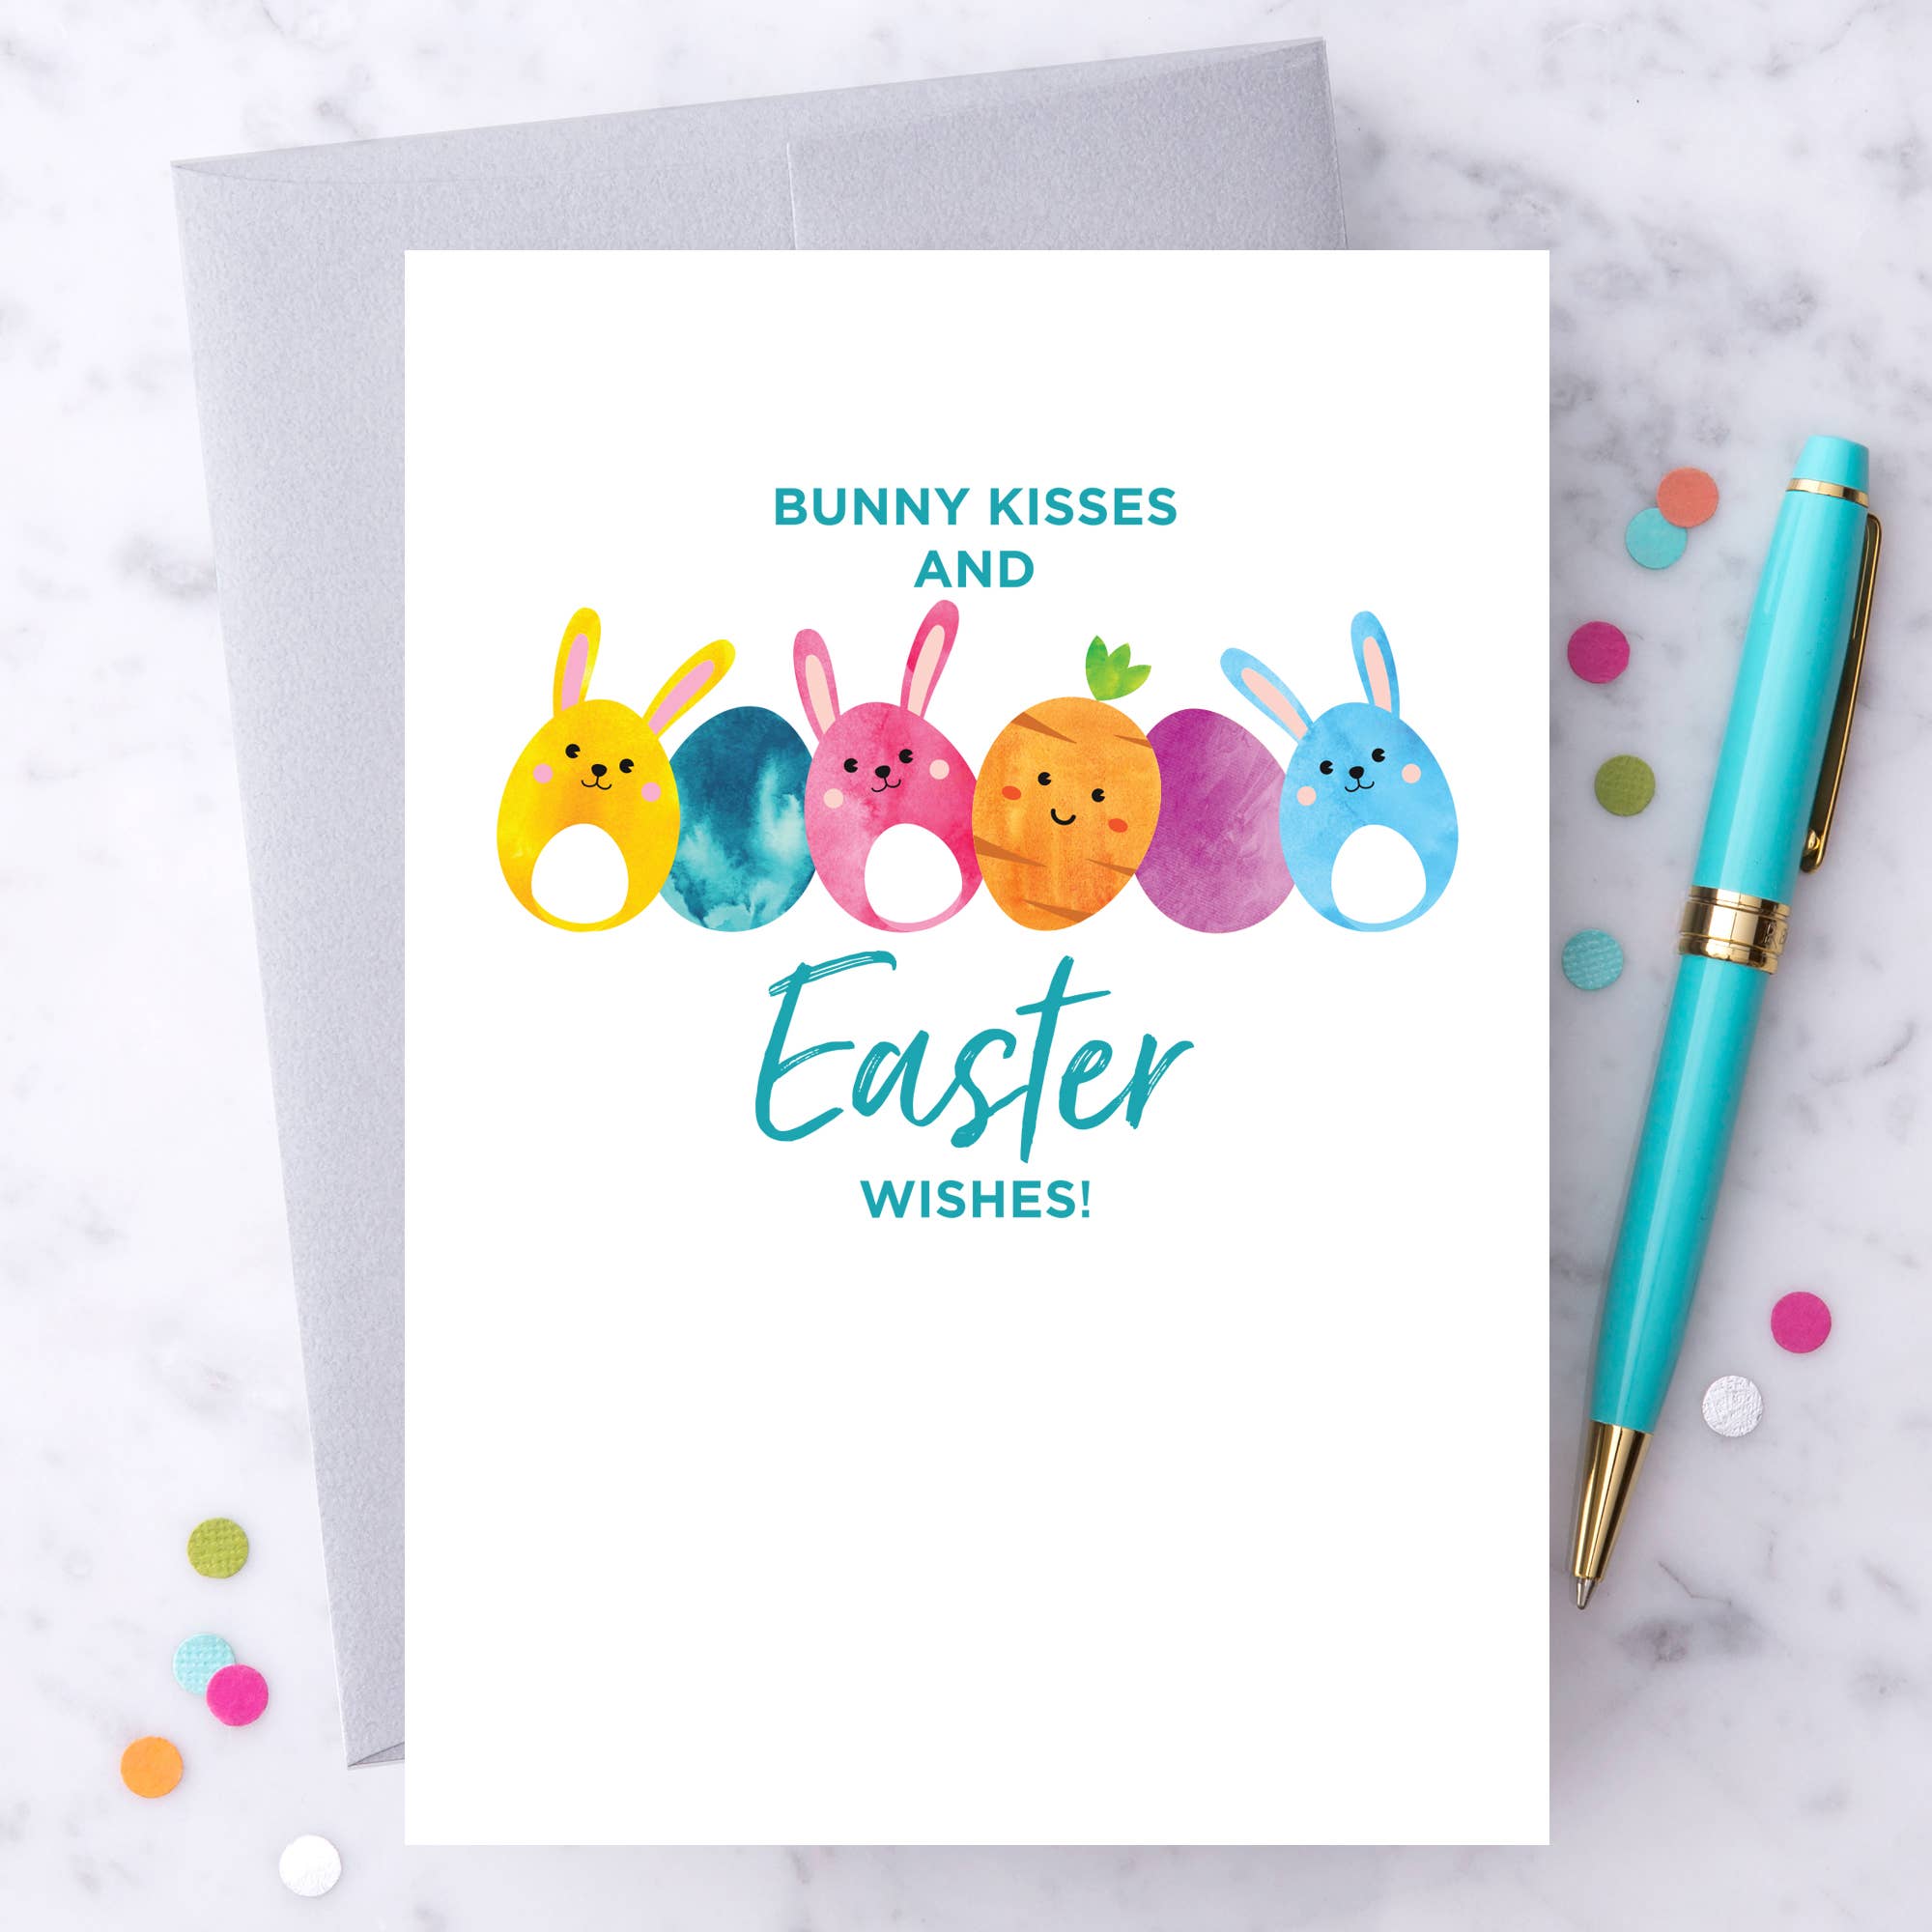 Bunny Kisses & Easter Wishes Greeting Card